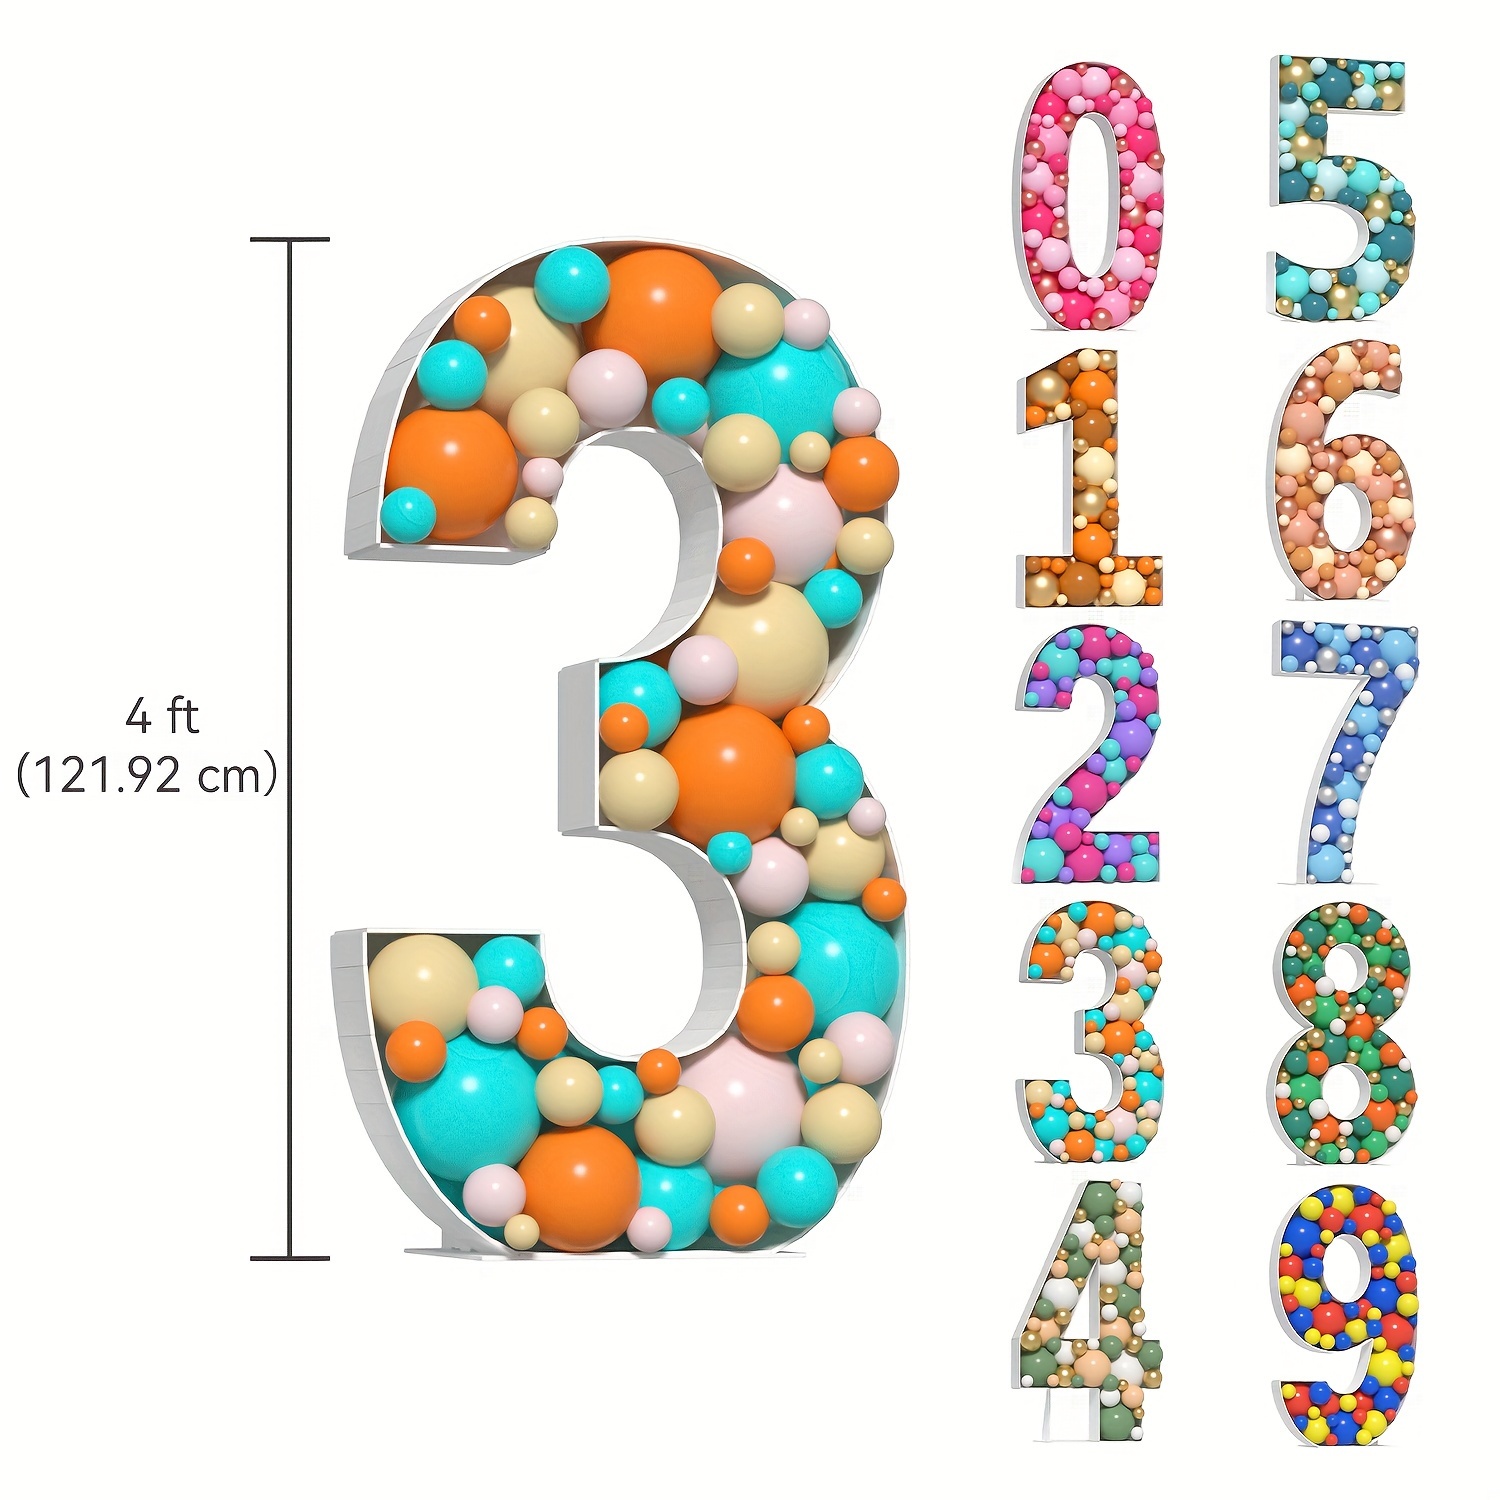 Mosaic Balloon Frame Light Up Marquee Pre-cut Kit Number Cut-out Extra  Large Foam Board Birthday Backdrop Birthday Boy Girl Party Anniversary  Decorati